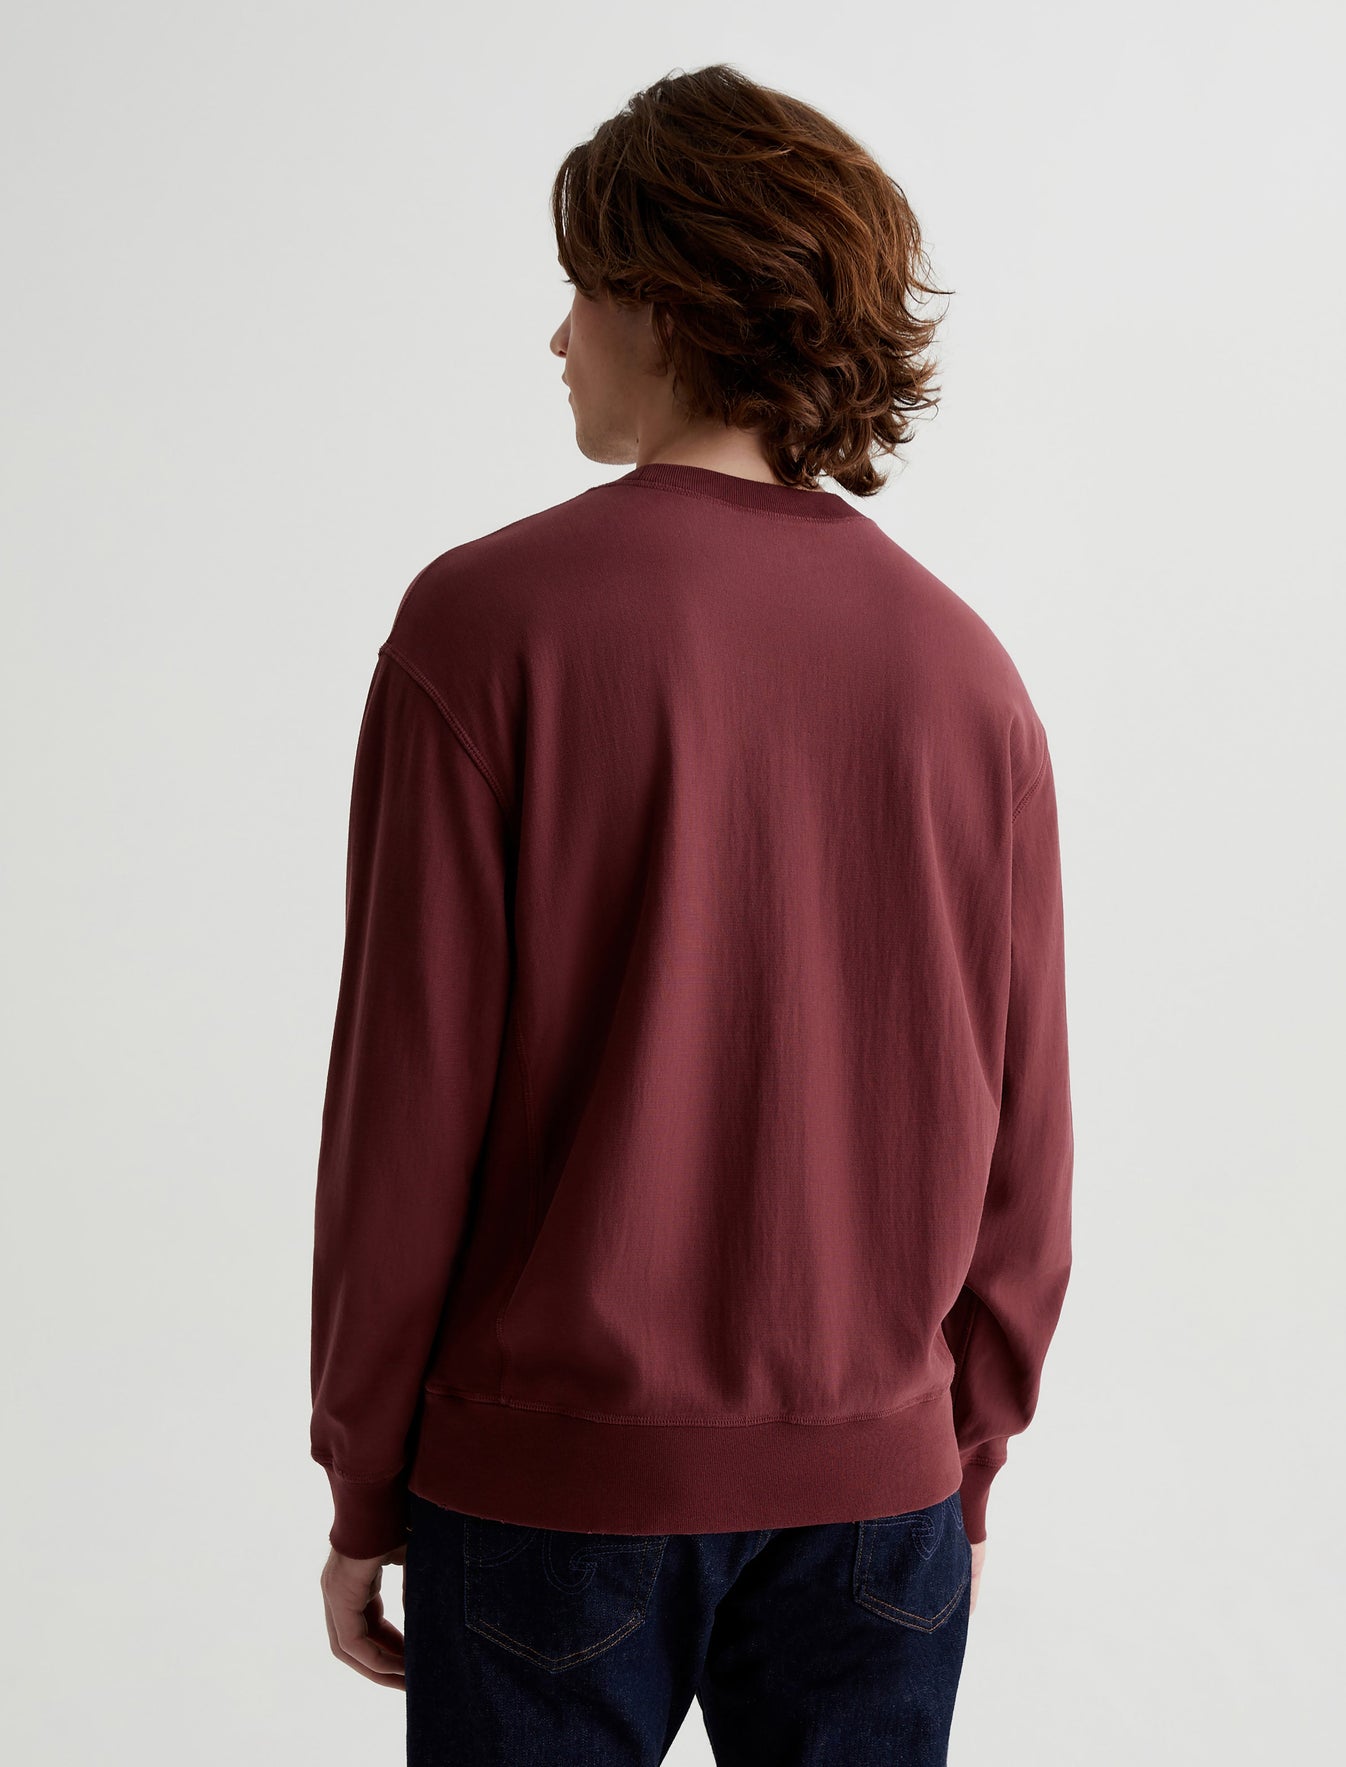 Arc Panelled Sweatshirt 5 Years Dark Plum Relaxed Fit Crew Neck Panelled Mens Top Photo 6